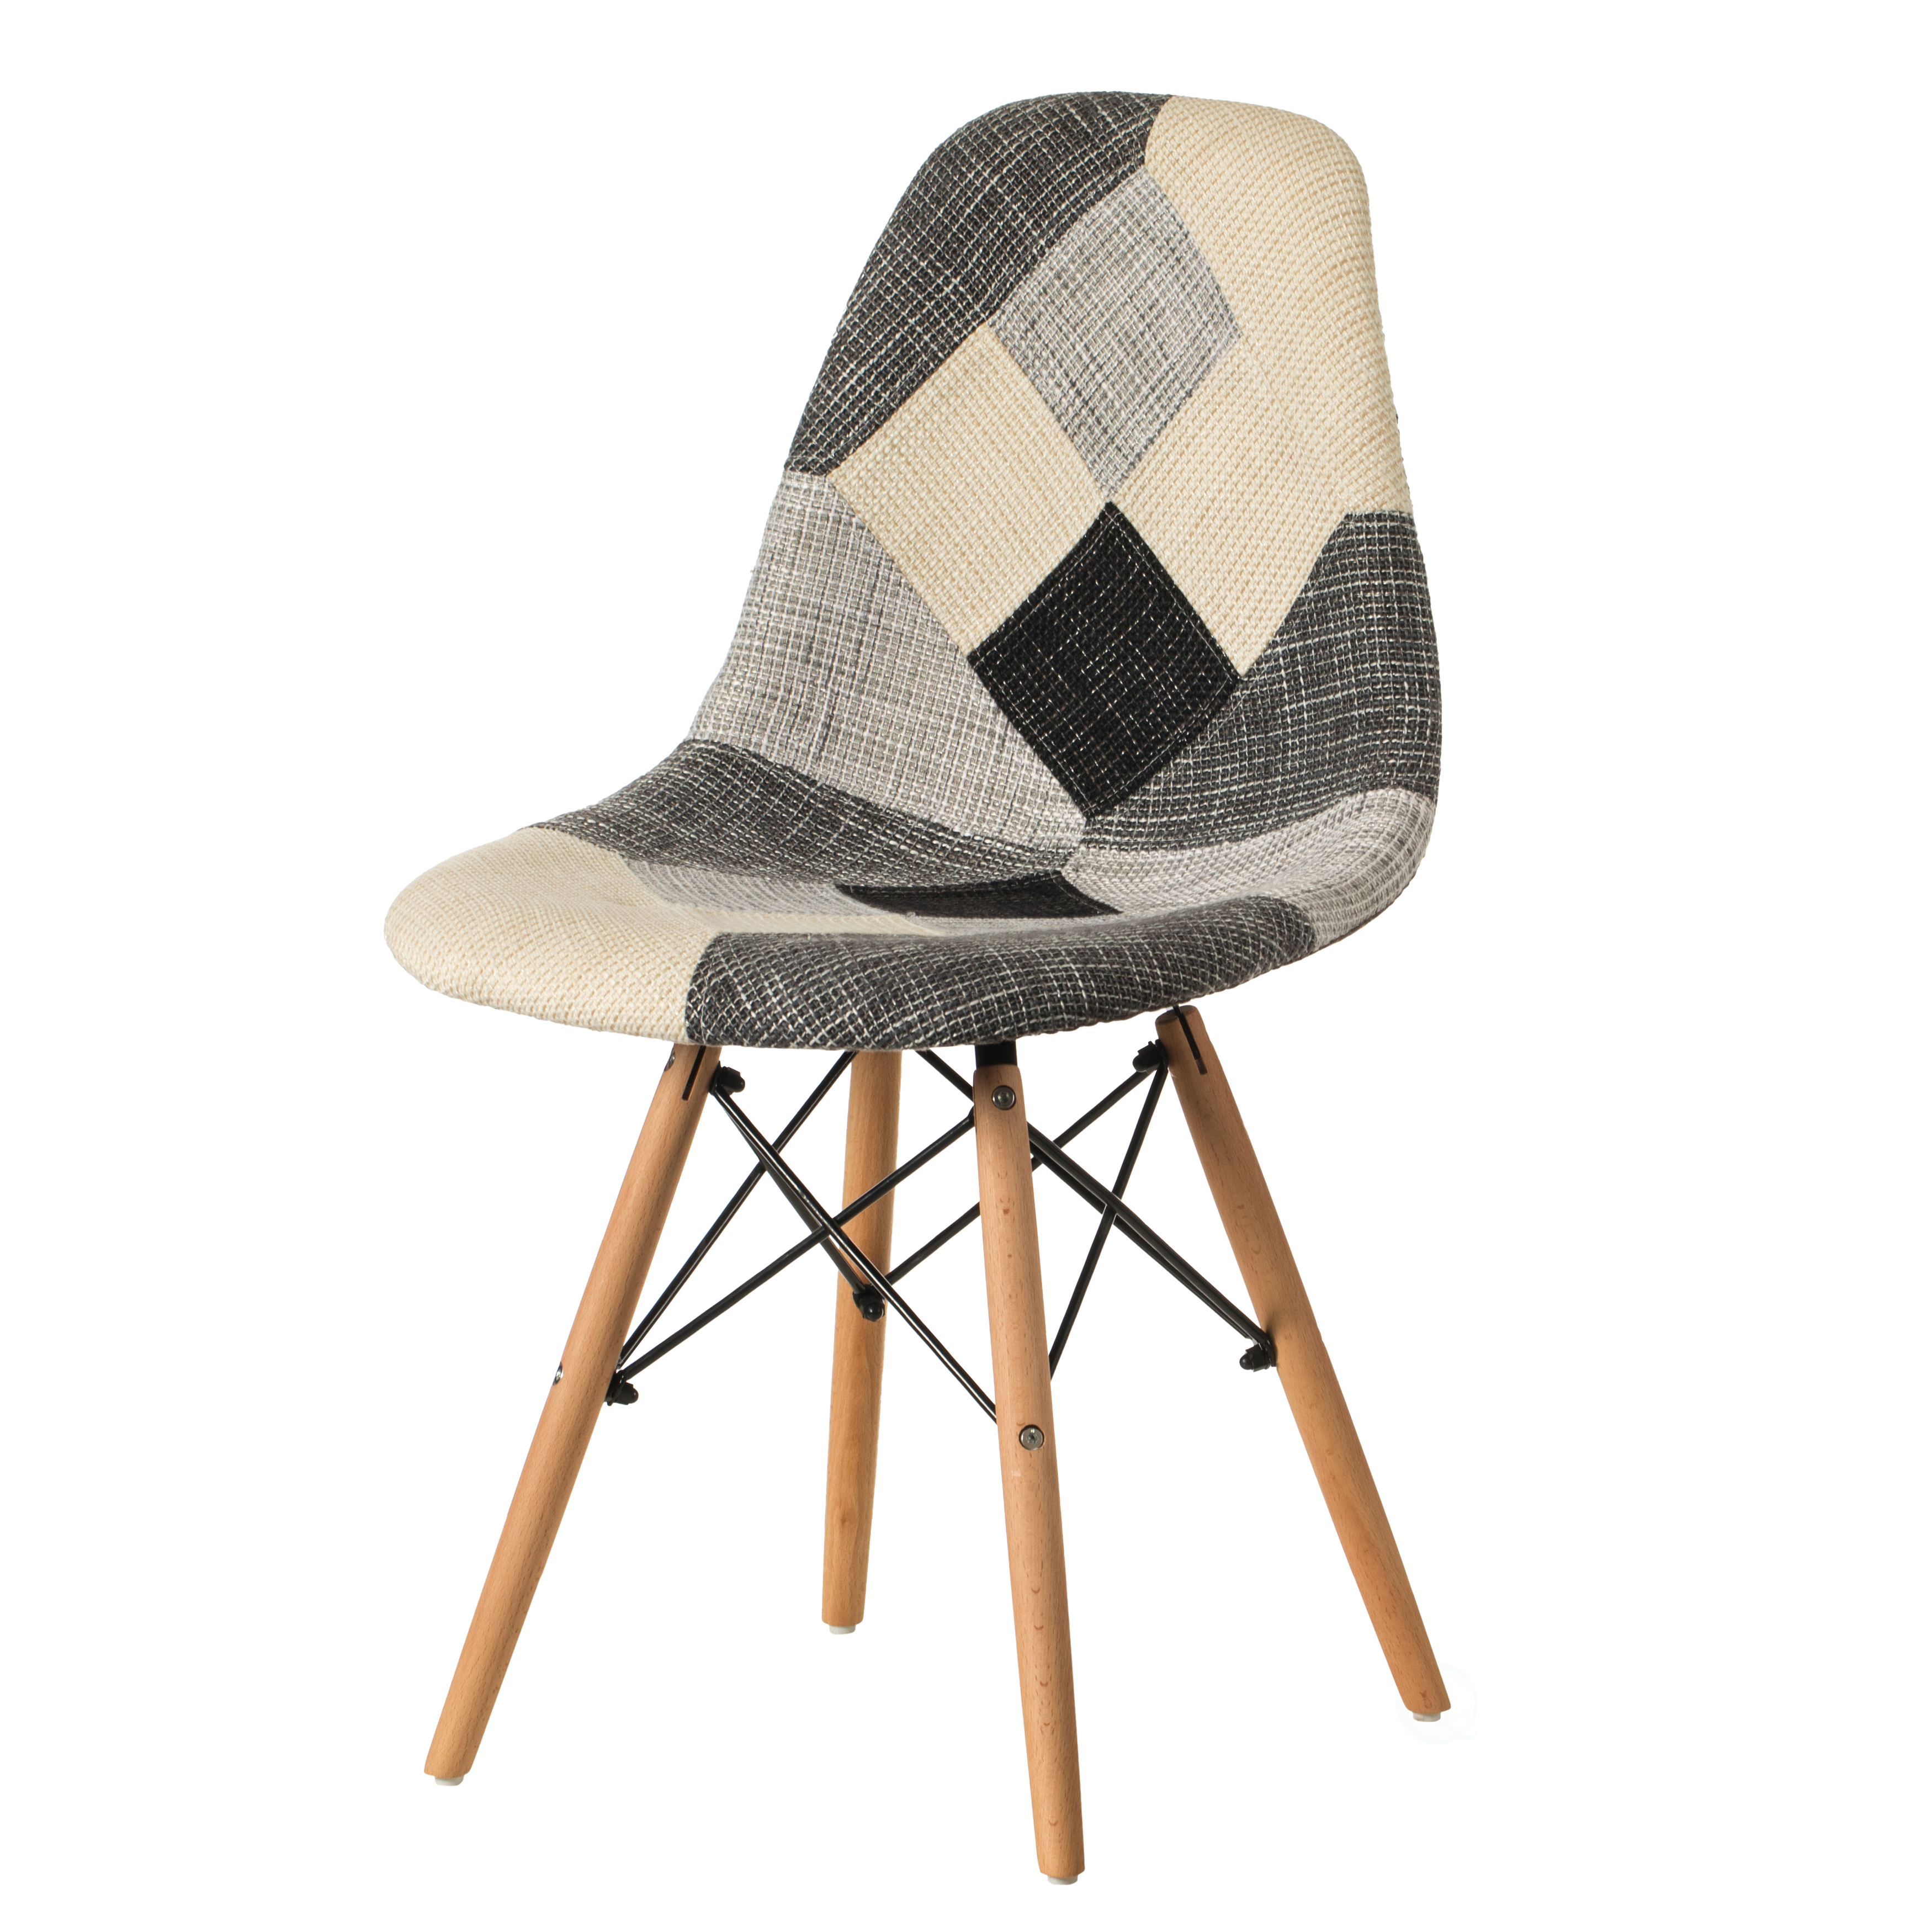 Modern Black And White Patchwork Fabric Chair With Wooden Legs For Kitchen, Dining Room, Entryway, Living Room - Single